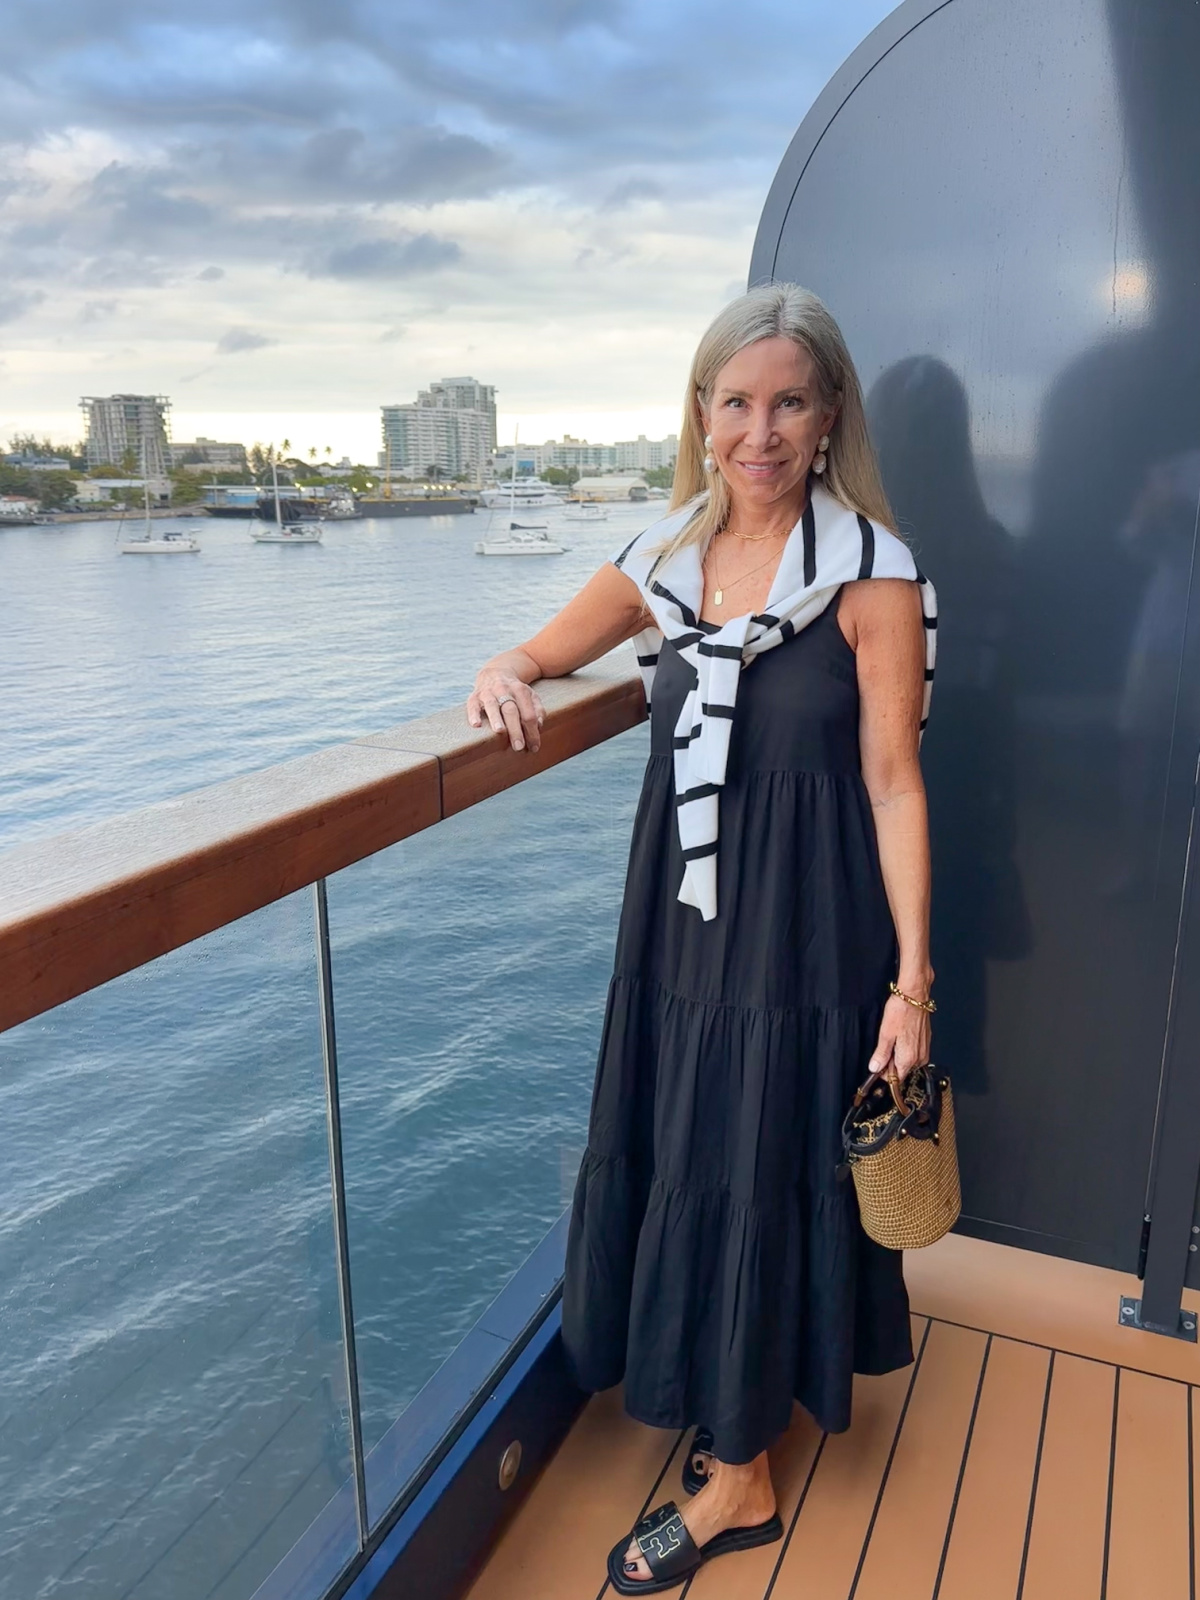 Woman wearing black dress and striped sweater on cruise ship deck.